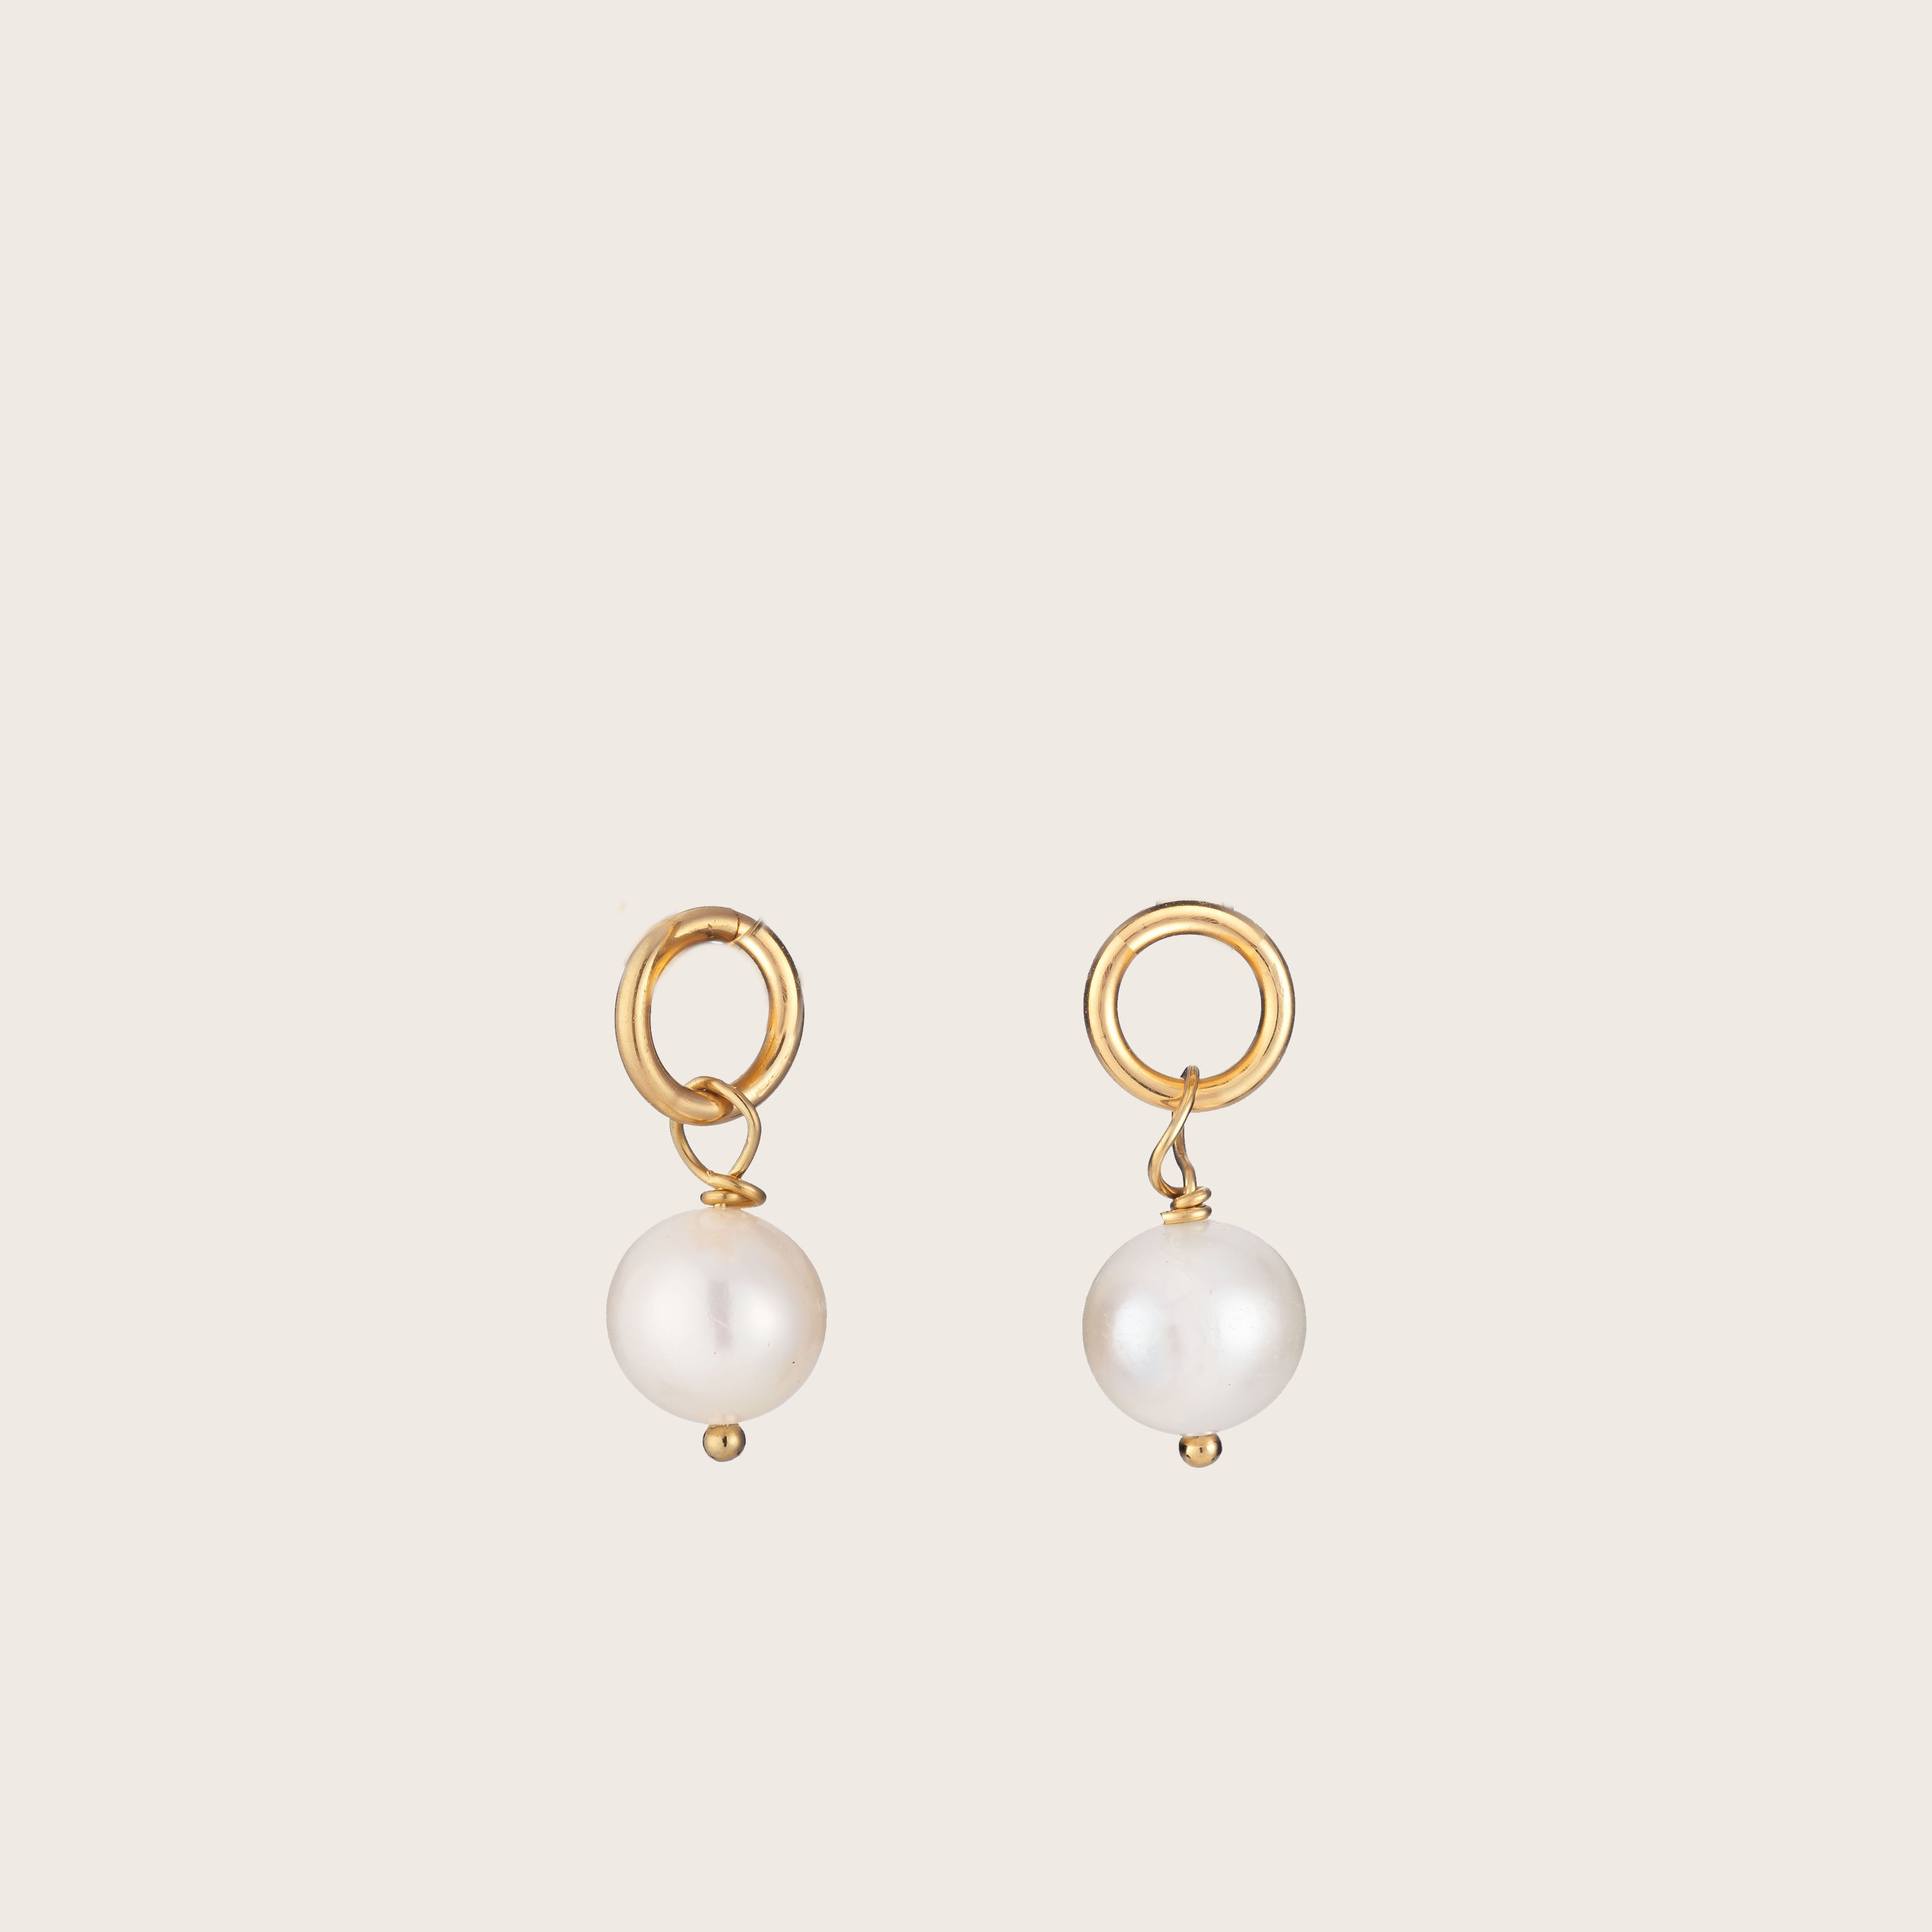 Pair of Pearl Charms - Harry Rocks London